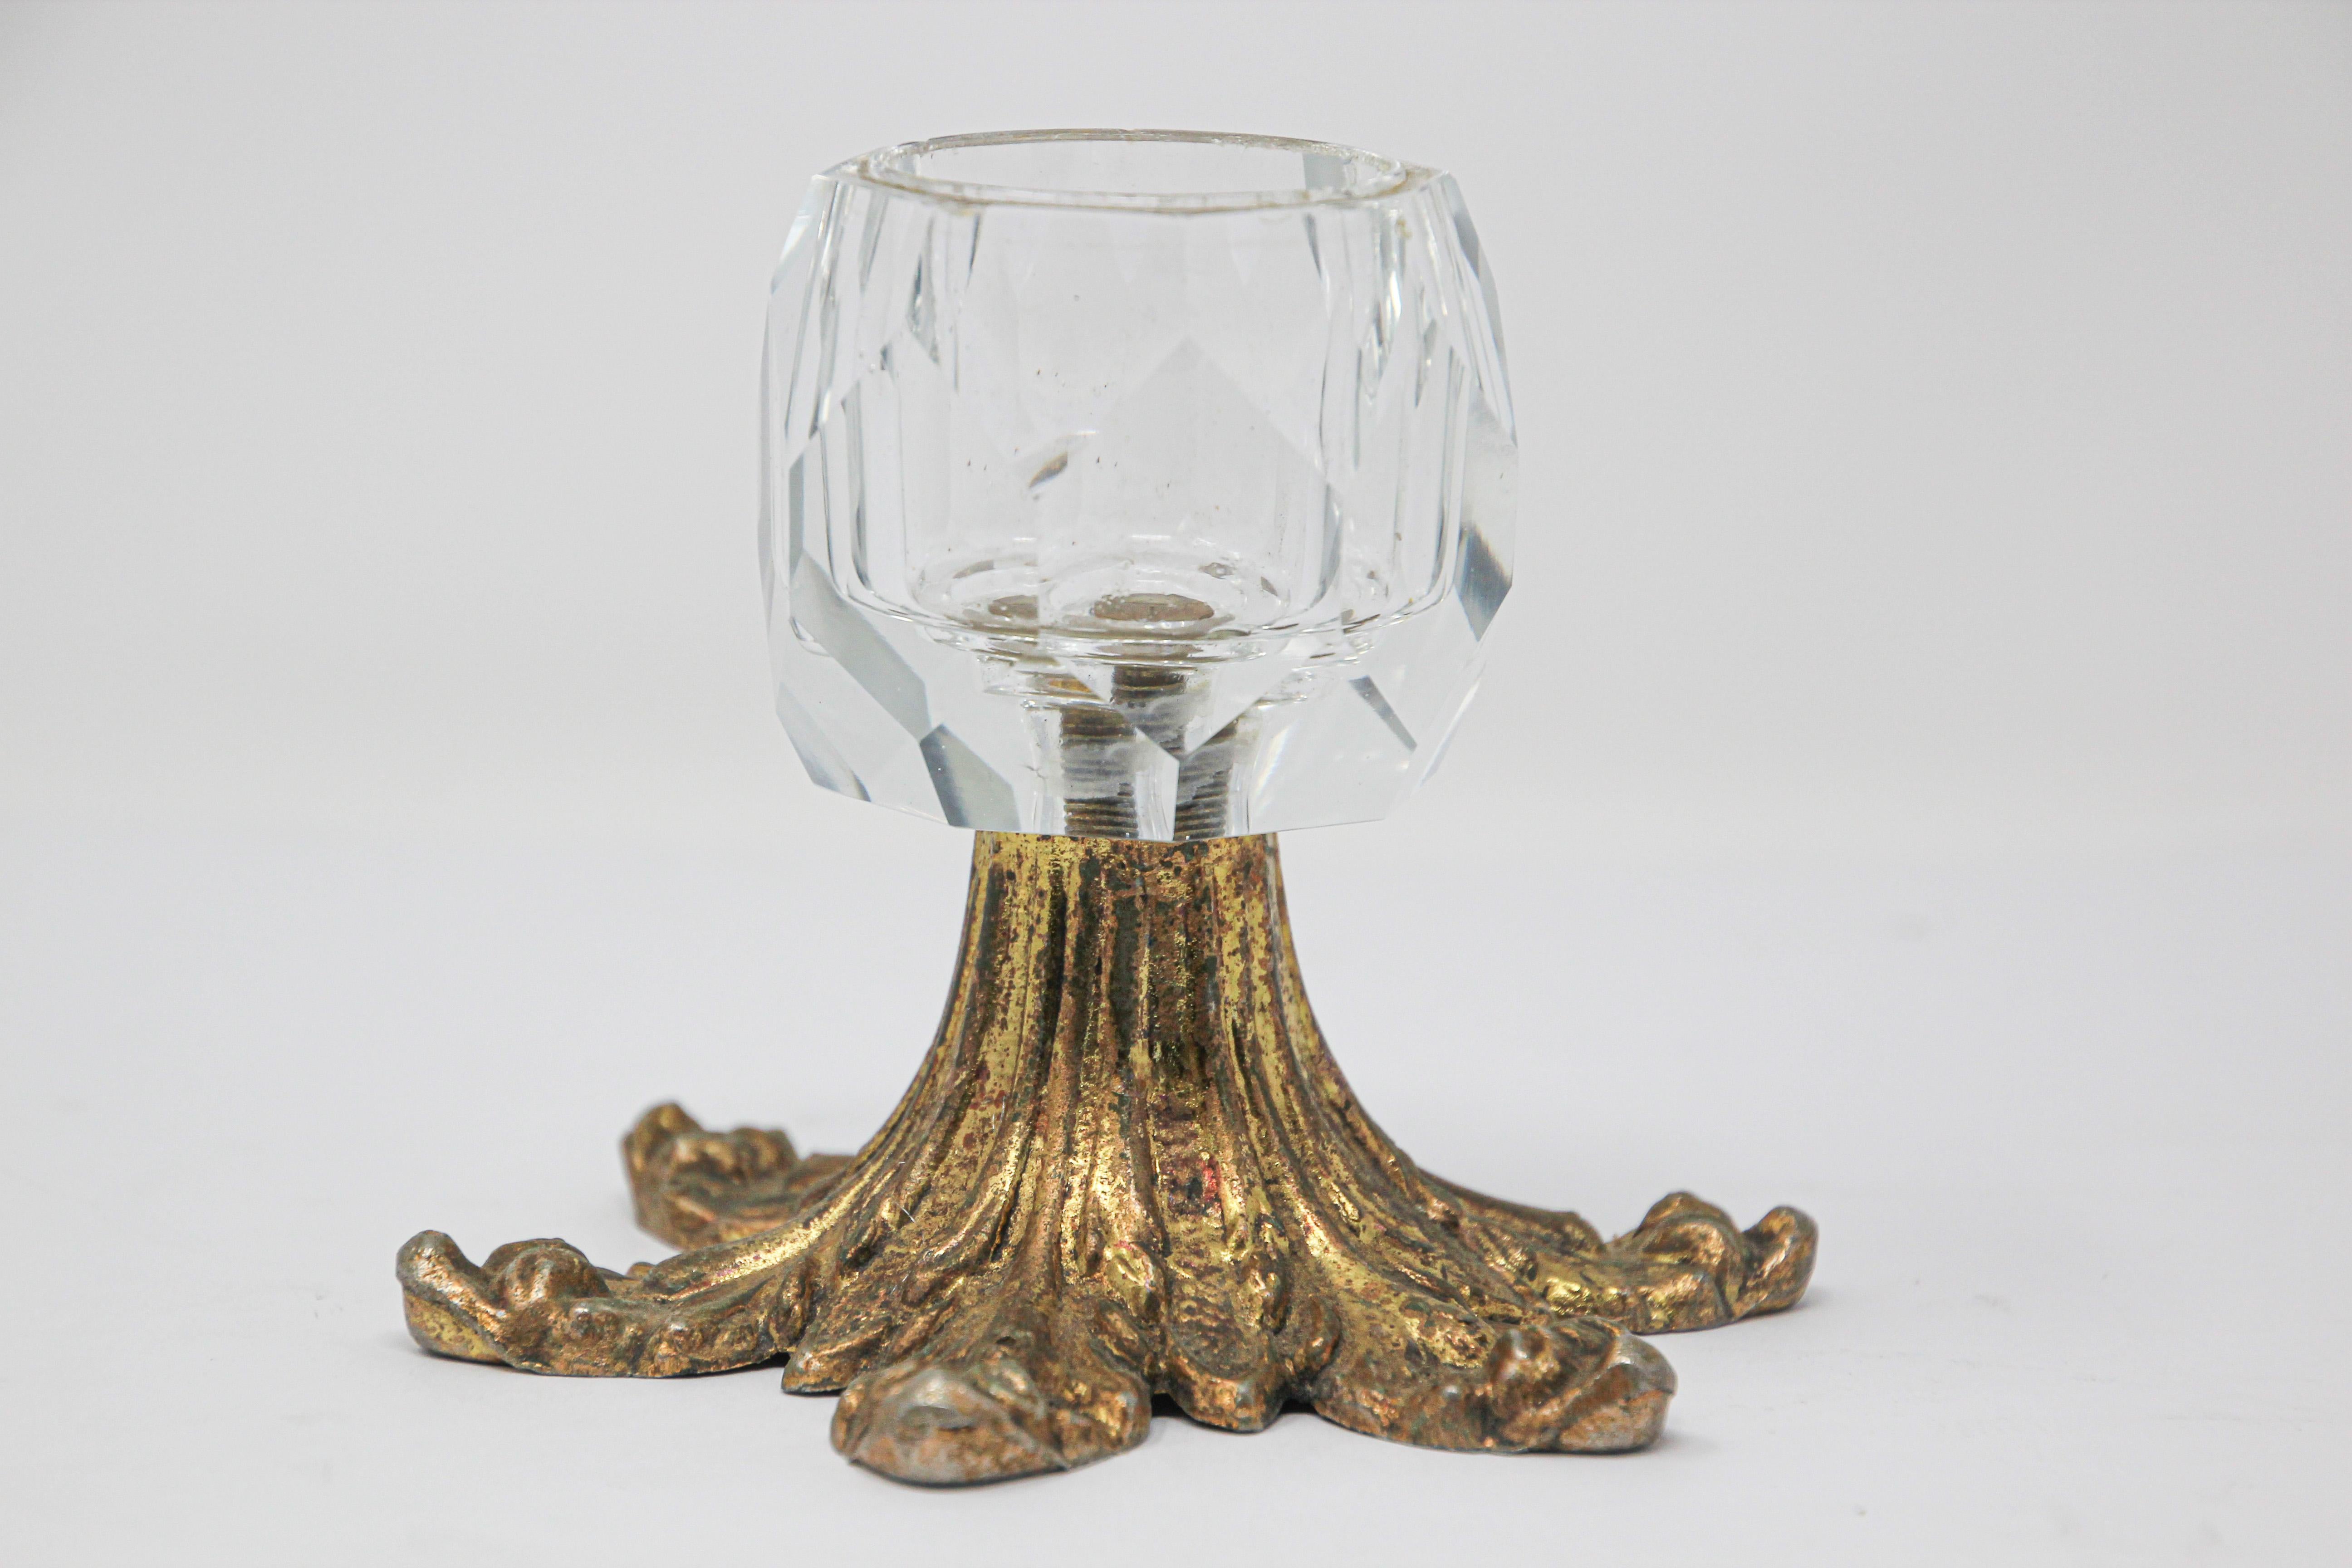 Vintage midcentury cast metal brass and glass candlestick.
The brass stand featuring leaves design.